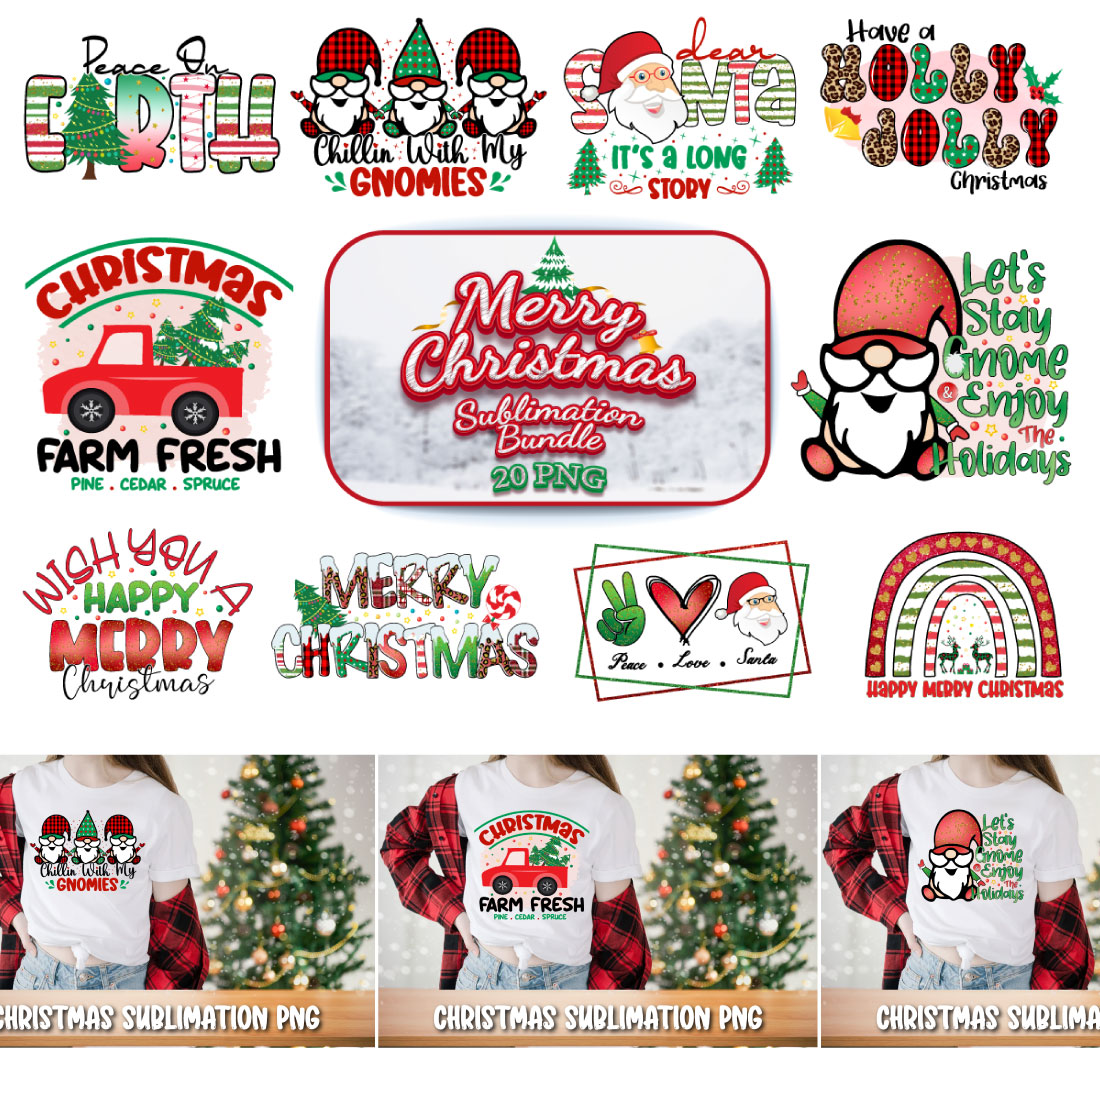 Merry Christmas Sublimation Bundle 20 PNG cover image.